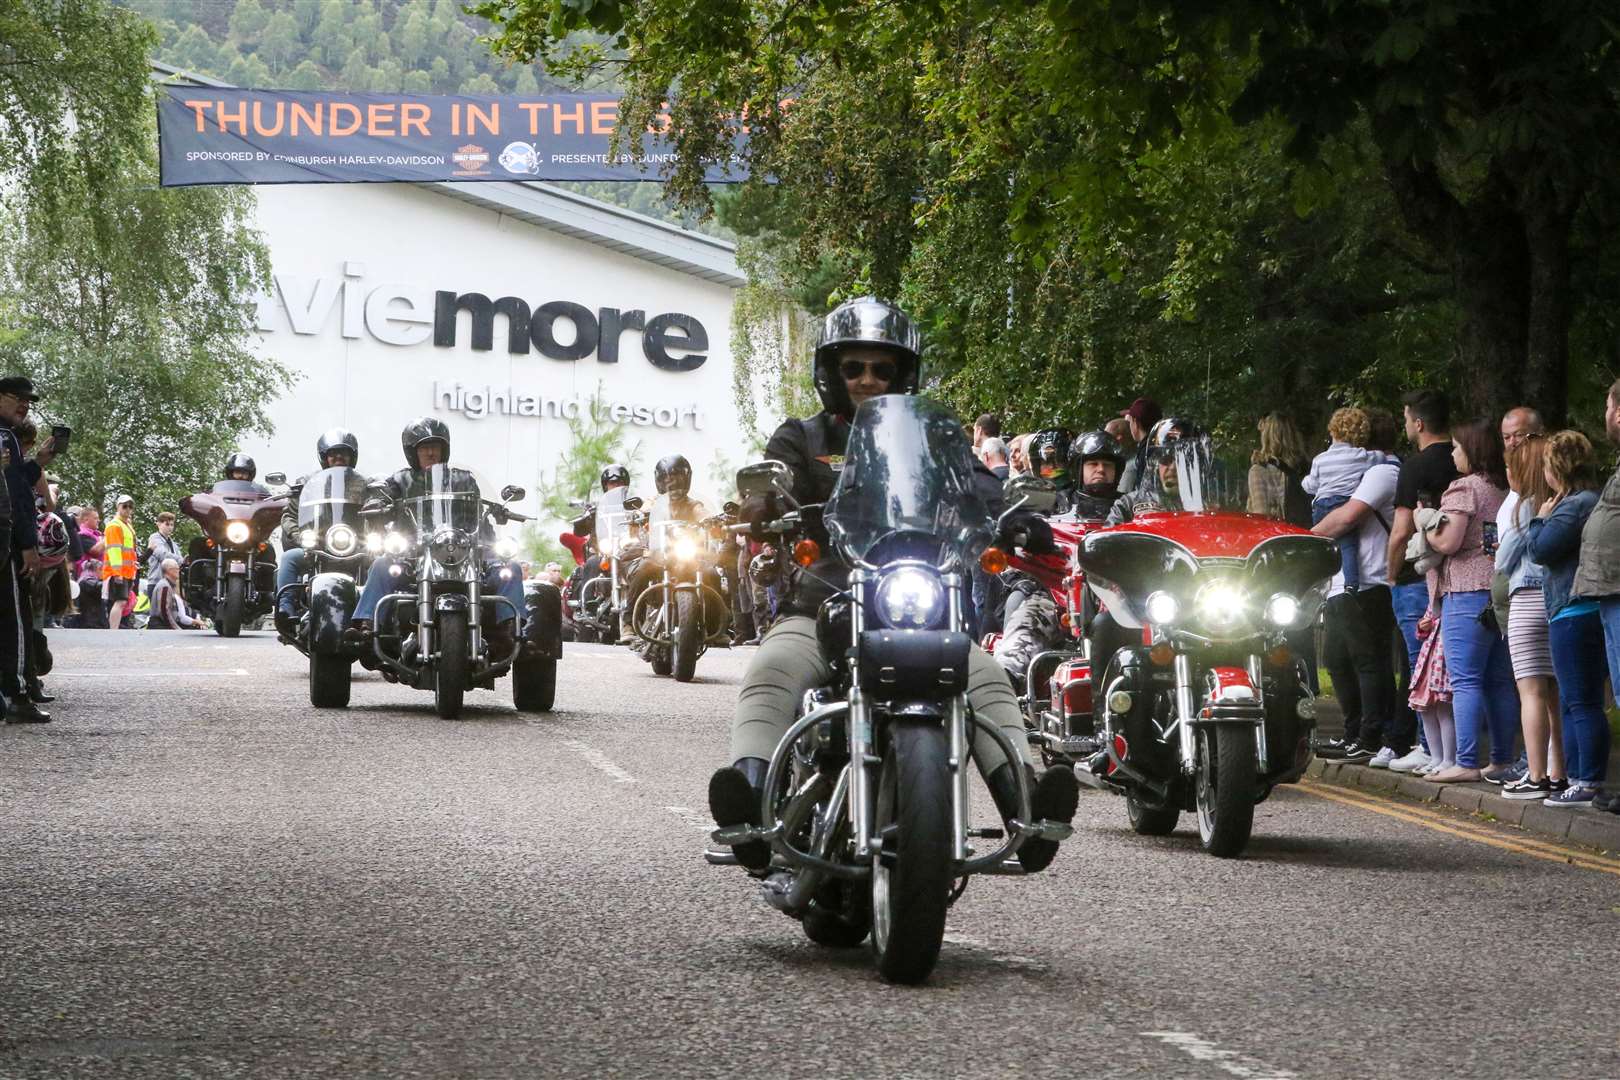 The mass ride-out from the Macdonald Aviemore Resort on the Saturday of the rally is one of the big highlights with thousands of Harleys taking part.